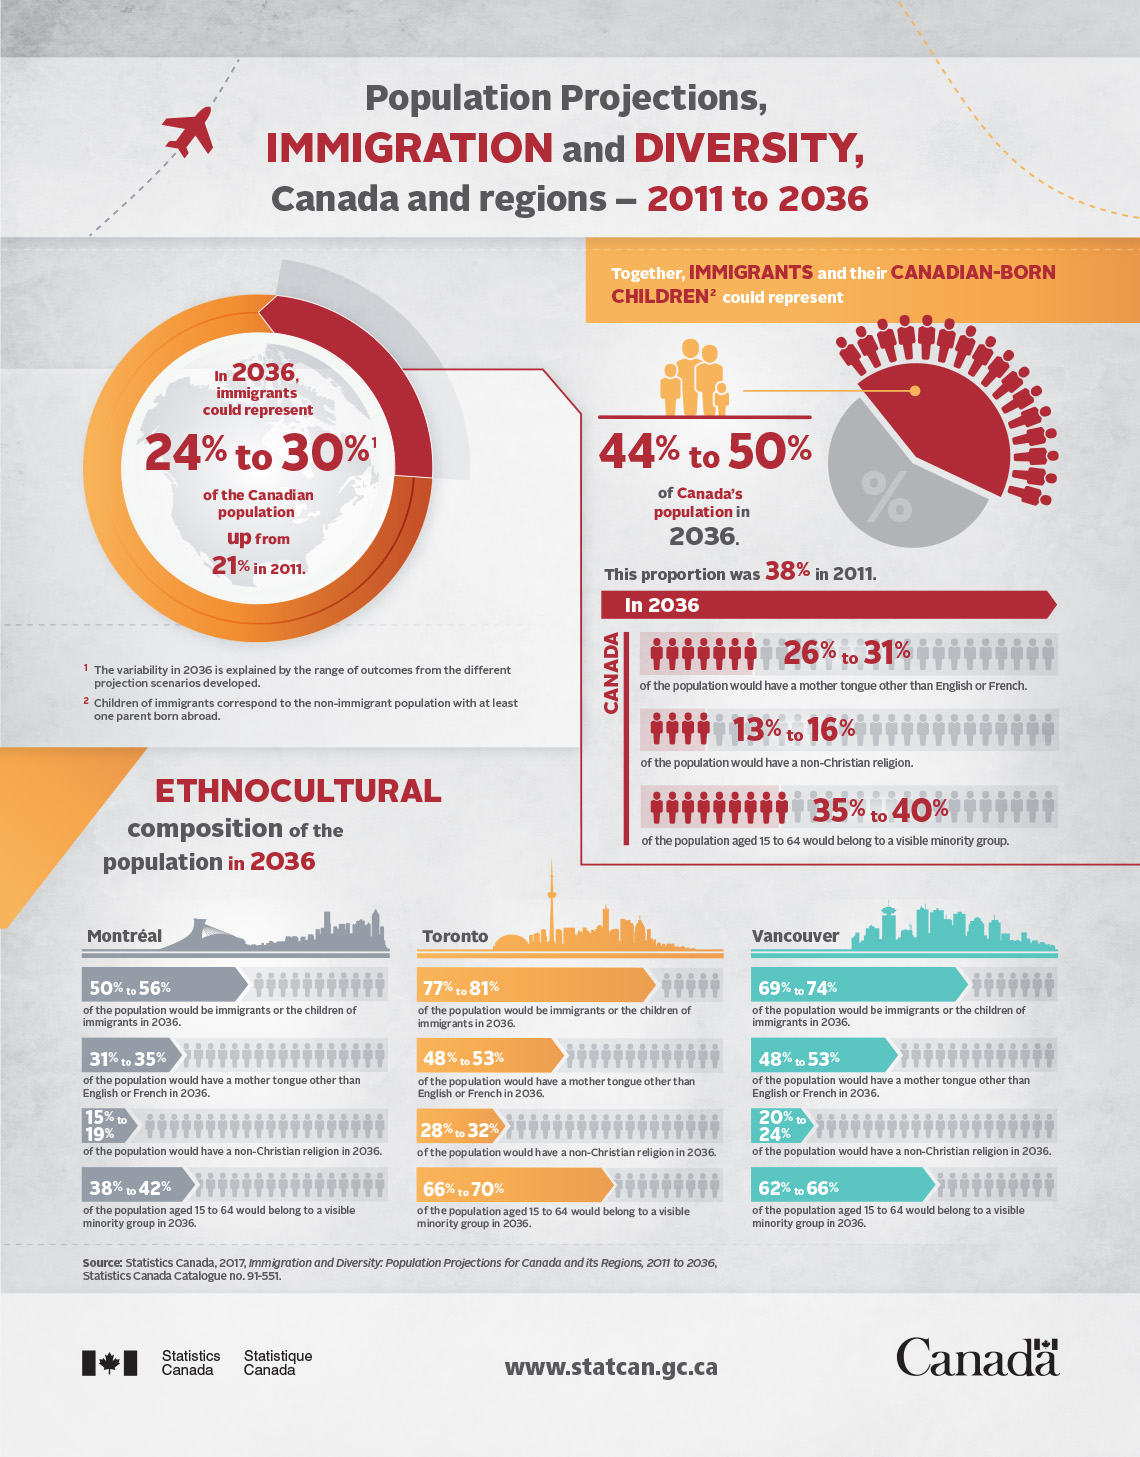 Infographic: Population Projections, Immigration and Diversity, Canada and regions, 2011 to 2036